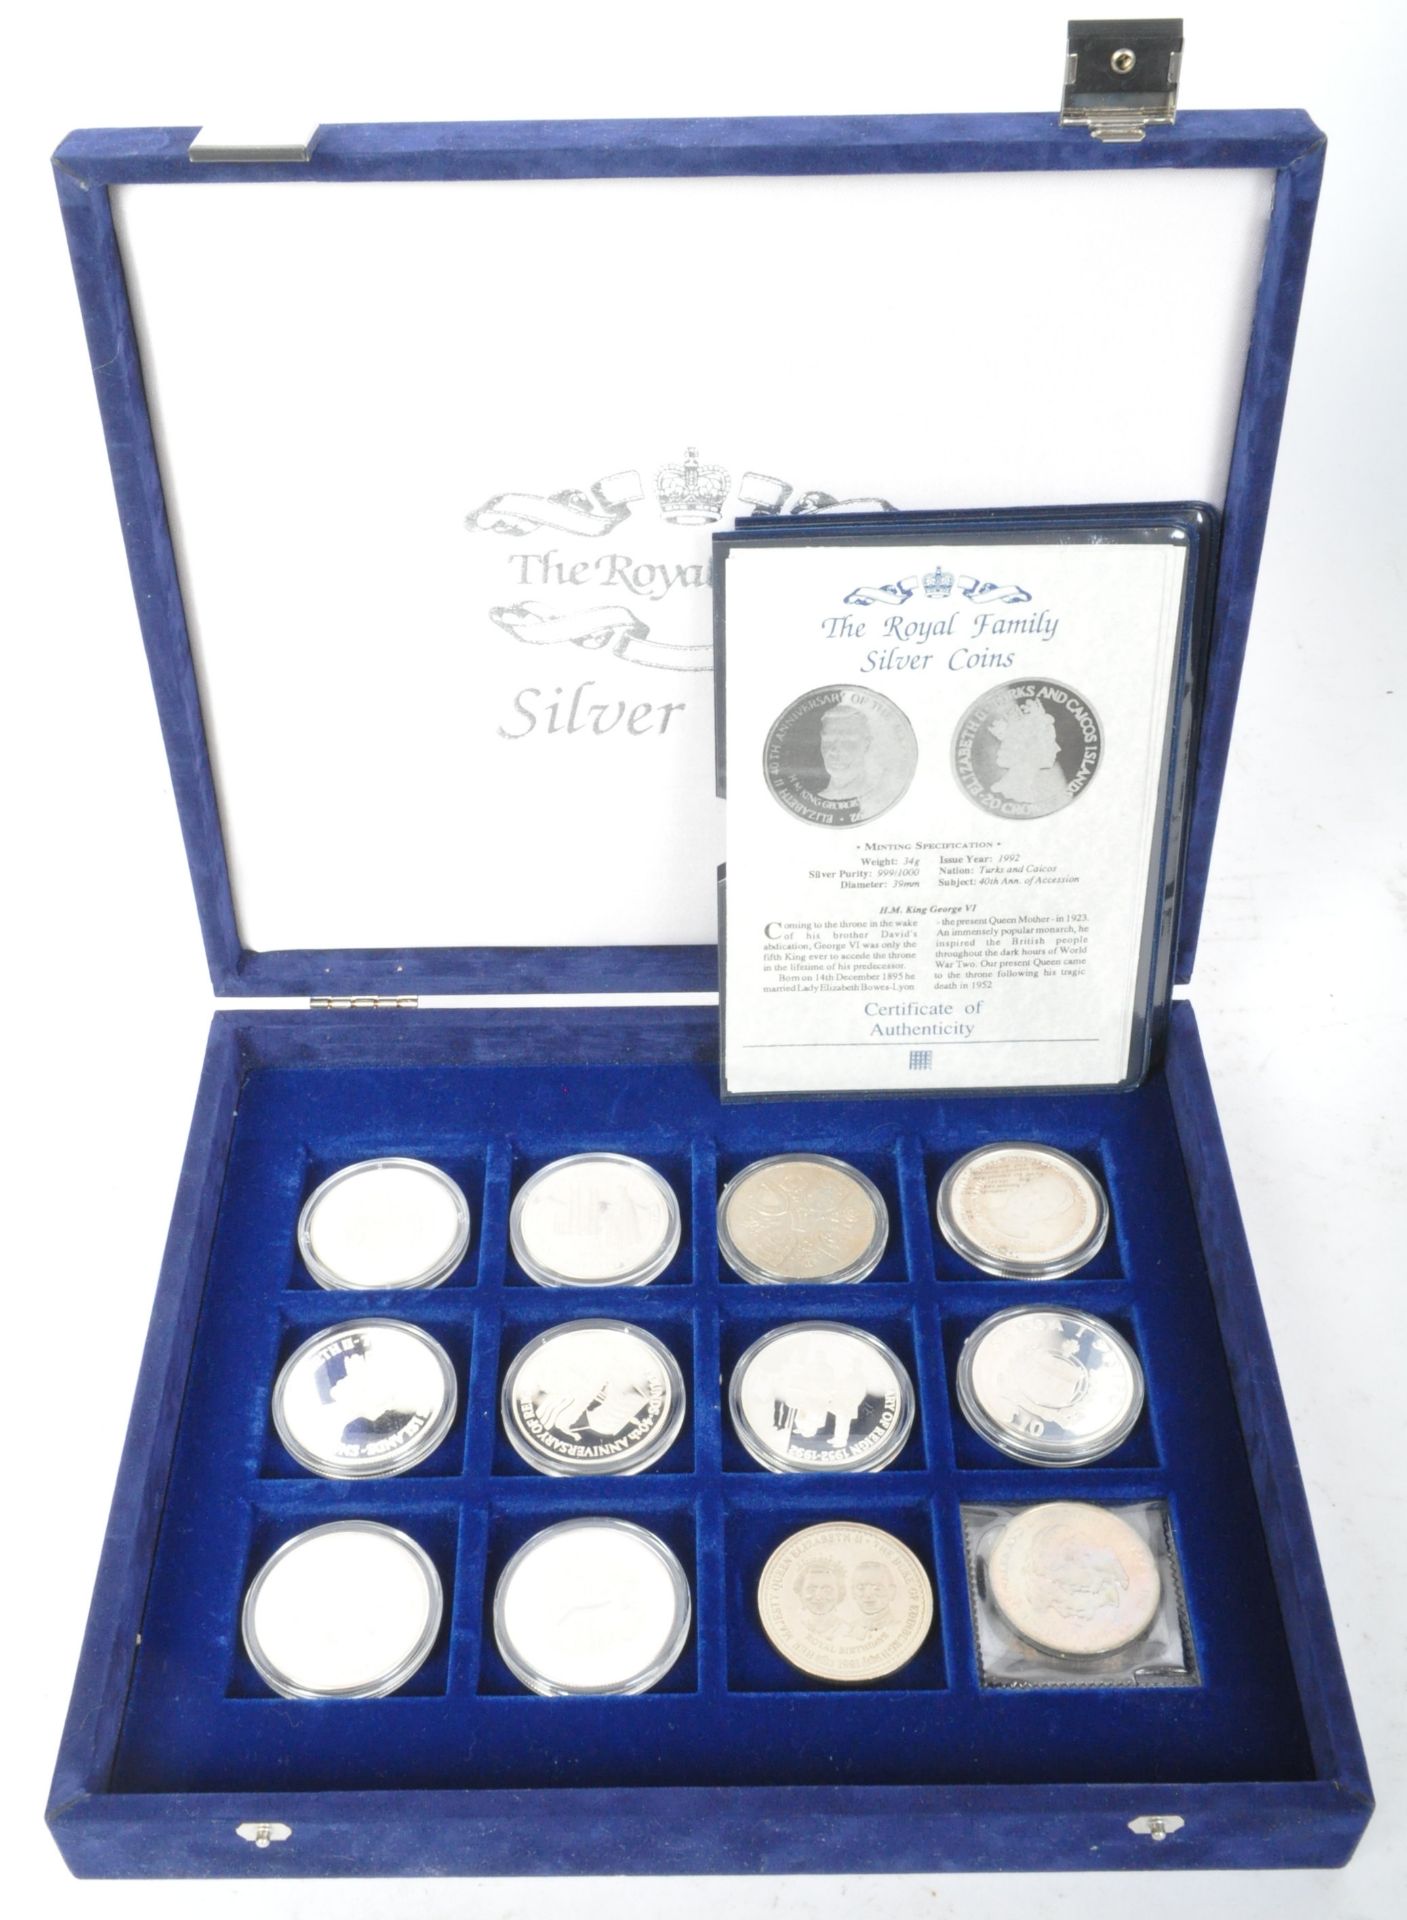 COLLECTION OF 12 SILVER PROOF AND OTHER ROYAL FAMILY COINS